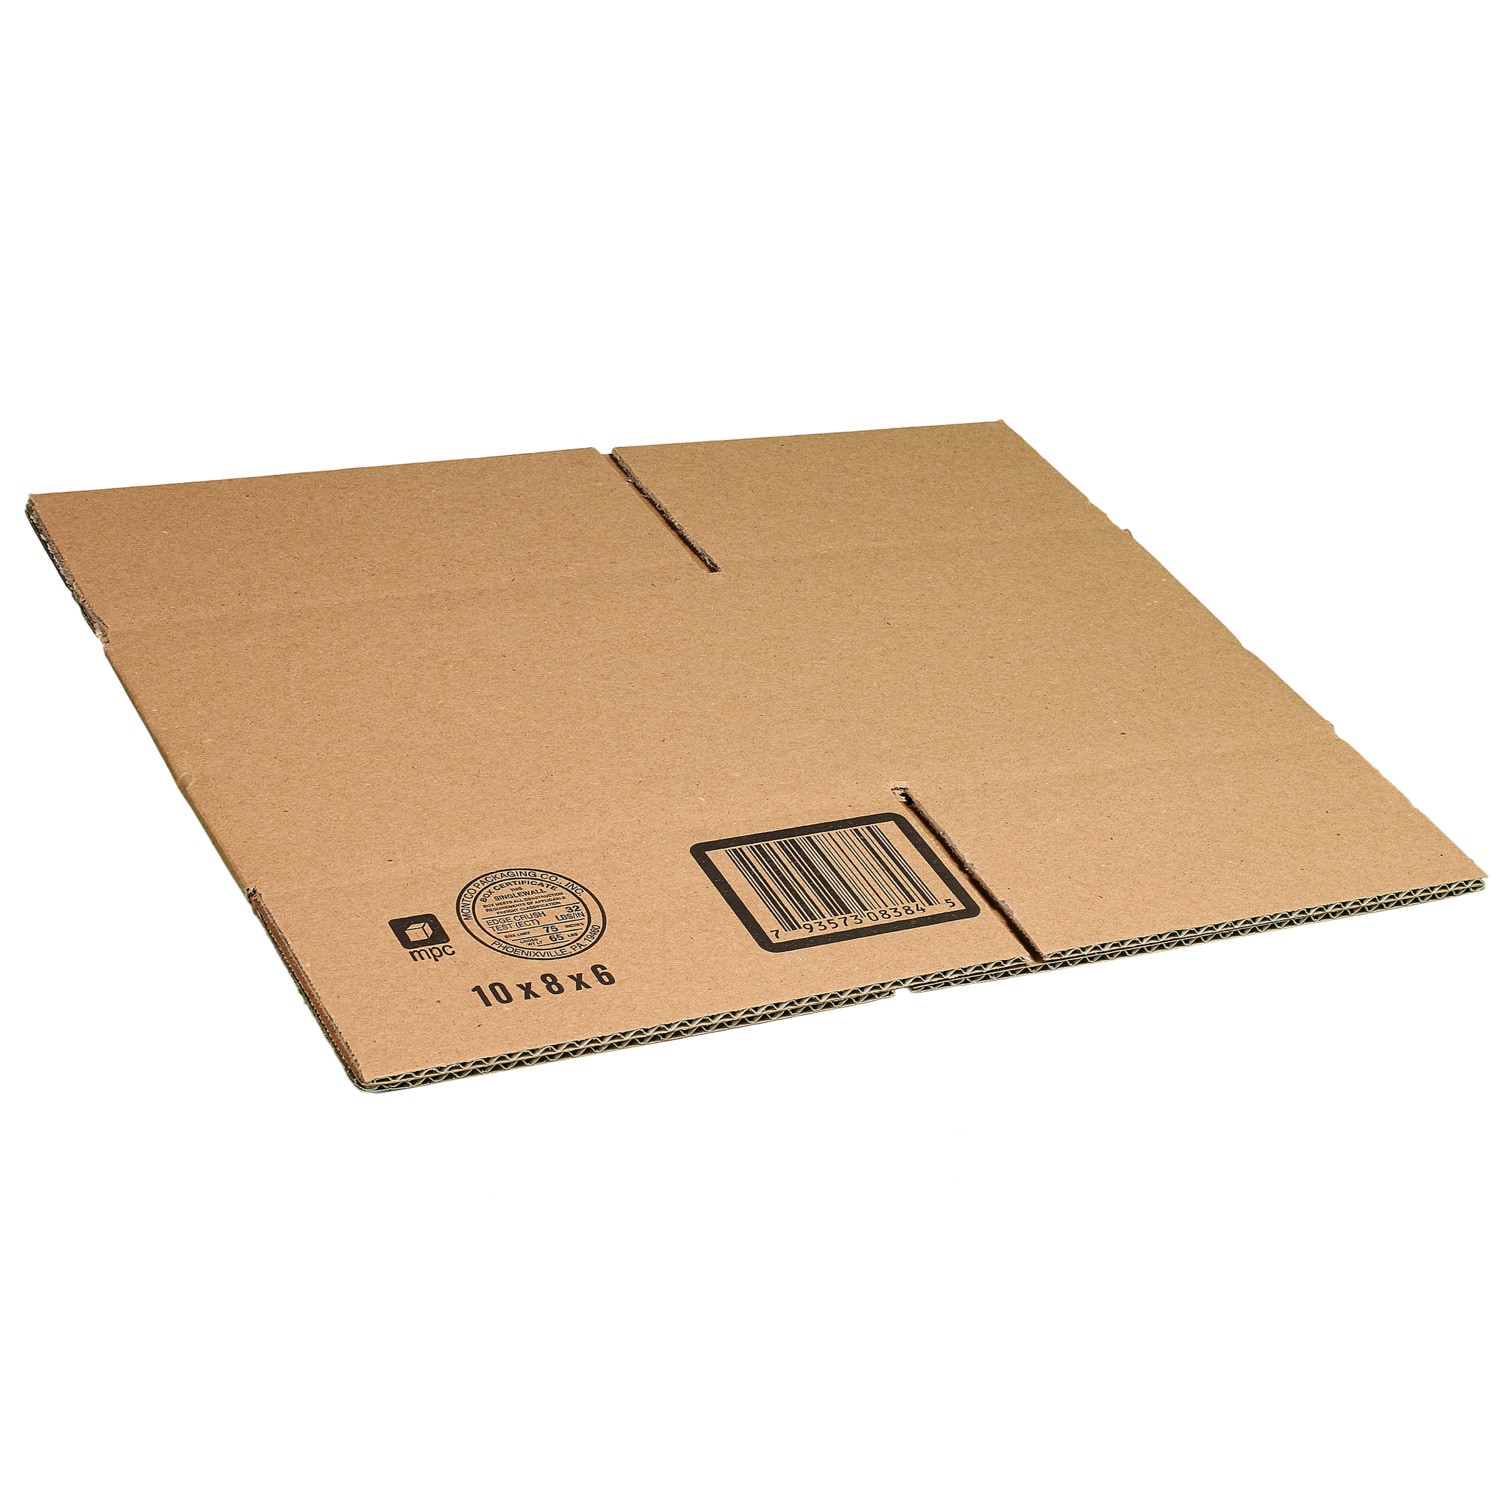 26x6x6 Cardboard Corrugated Box Packing Mailing Shipping Moving Cartons 10-100